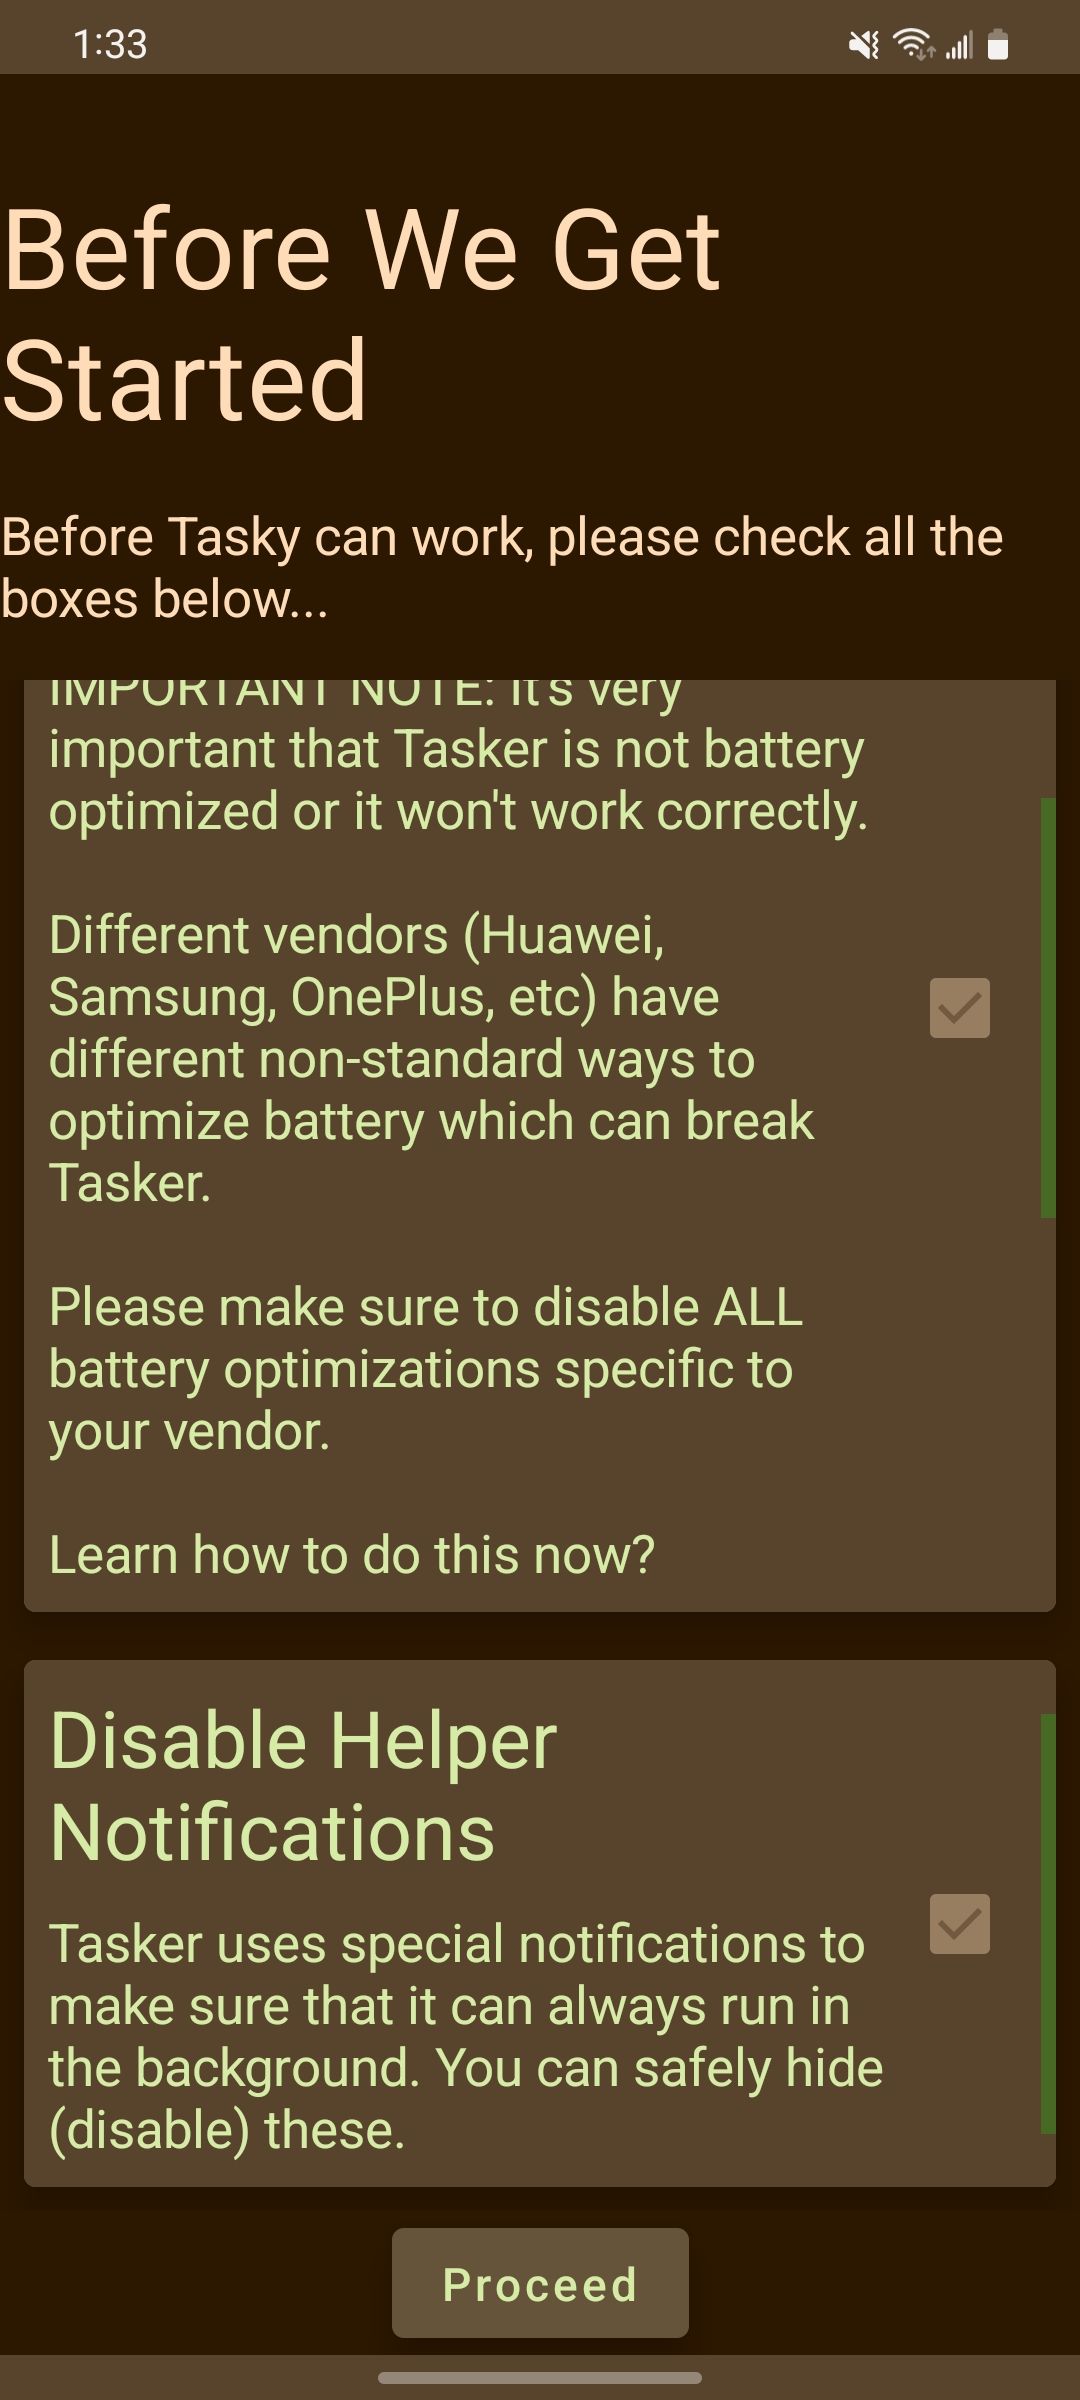 Finishing up the Tasker setup process before getting to the main screen